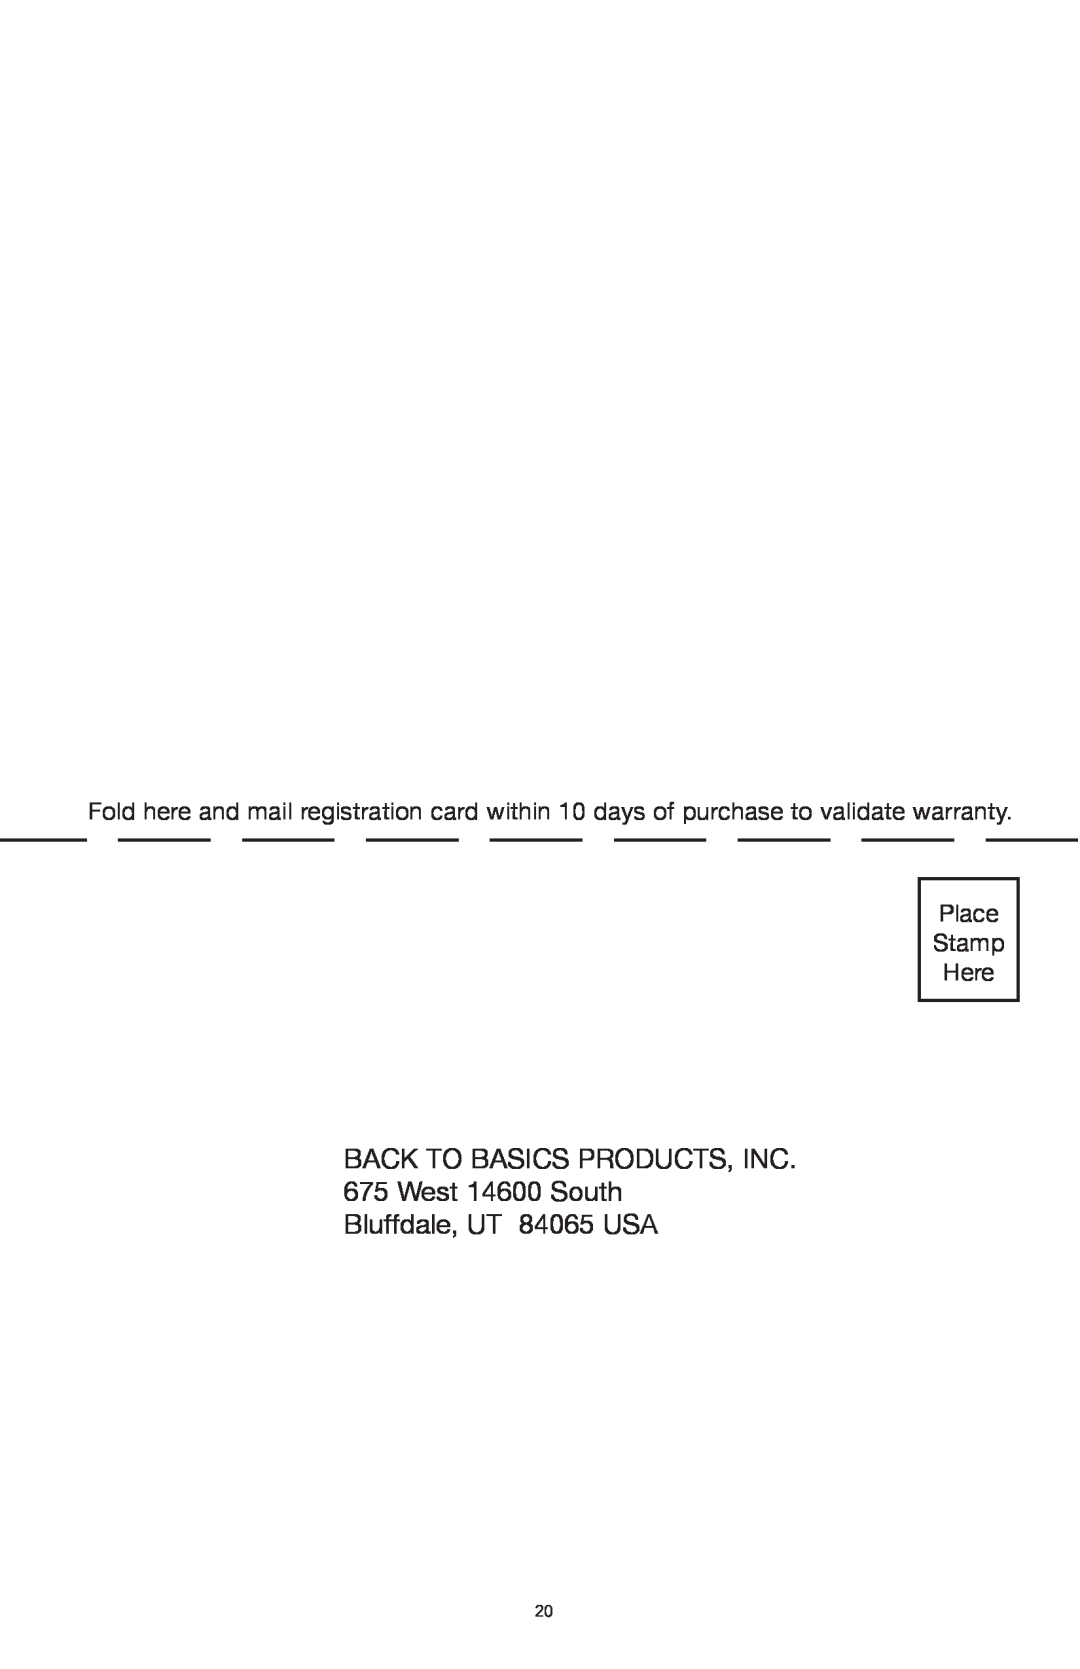 West Bend Back to Basics SR1000 manual BACK TO BASICS PRODUCTS, INC 675 West 14600 South, Bluffdale, UT 84065 USA 